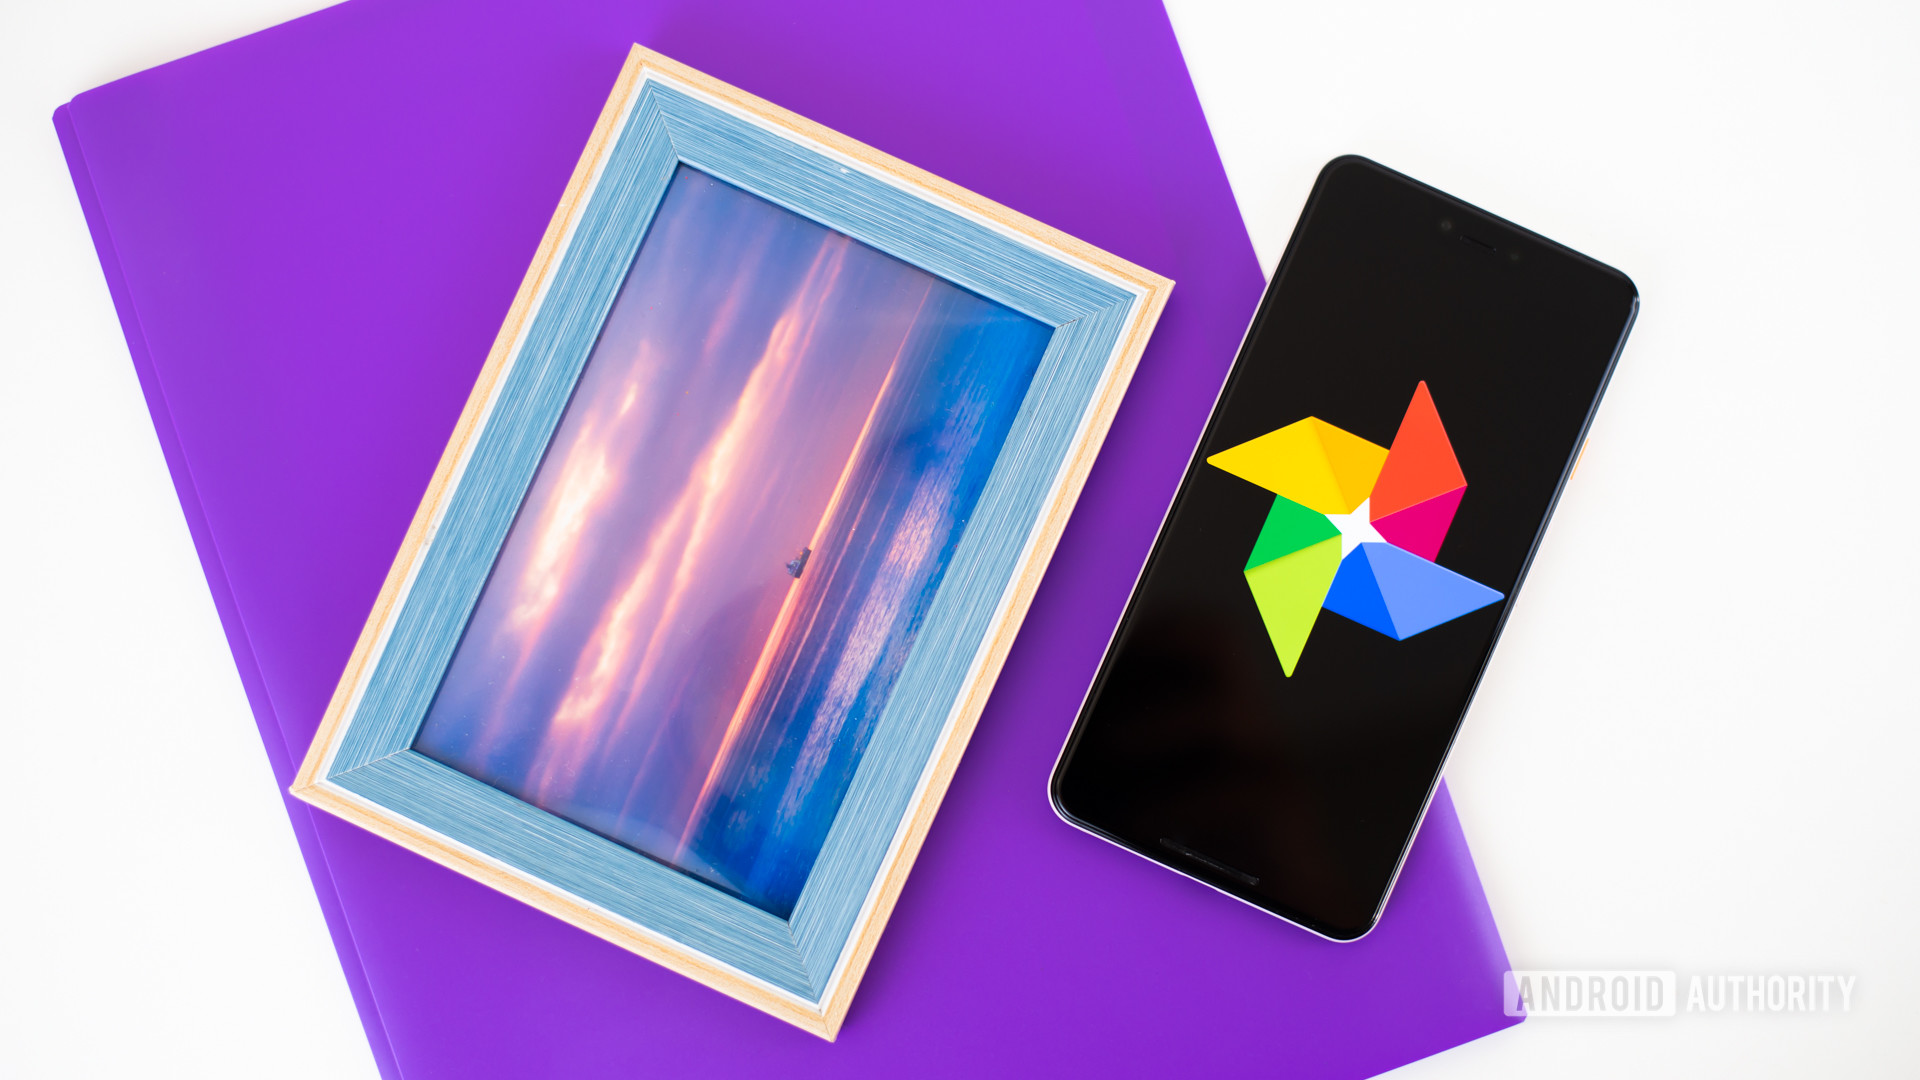 Google Photos logo on smartphone next to imaging accessories stock photo 2